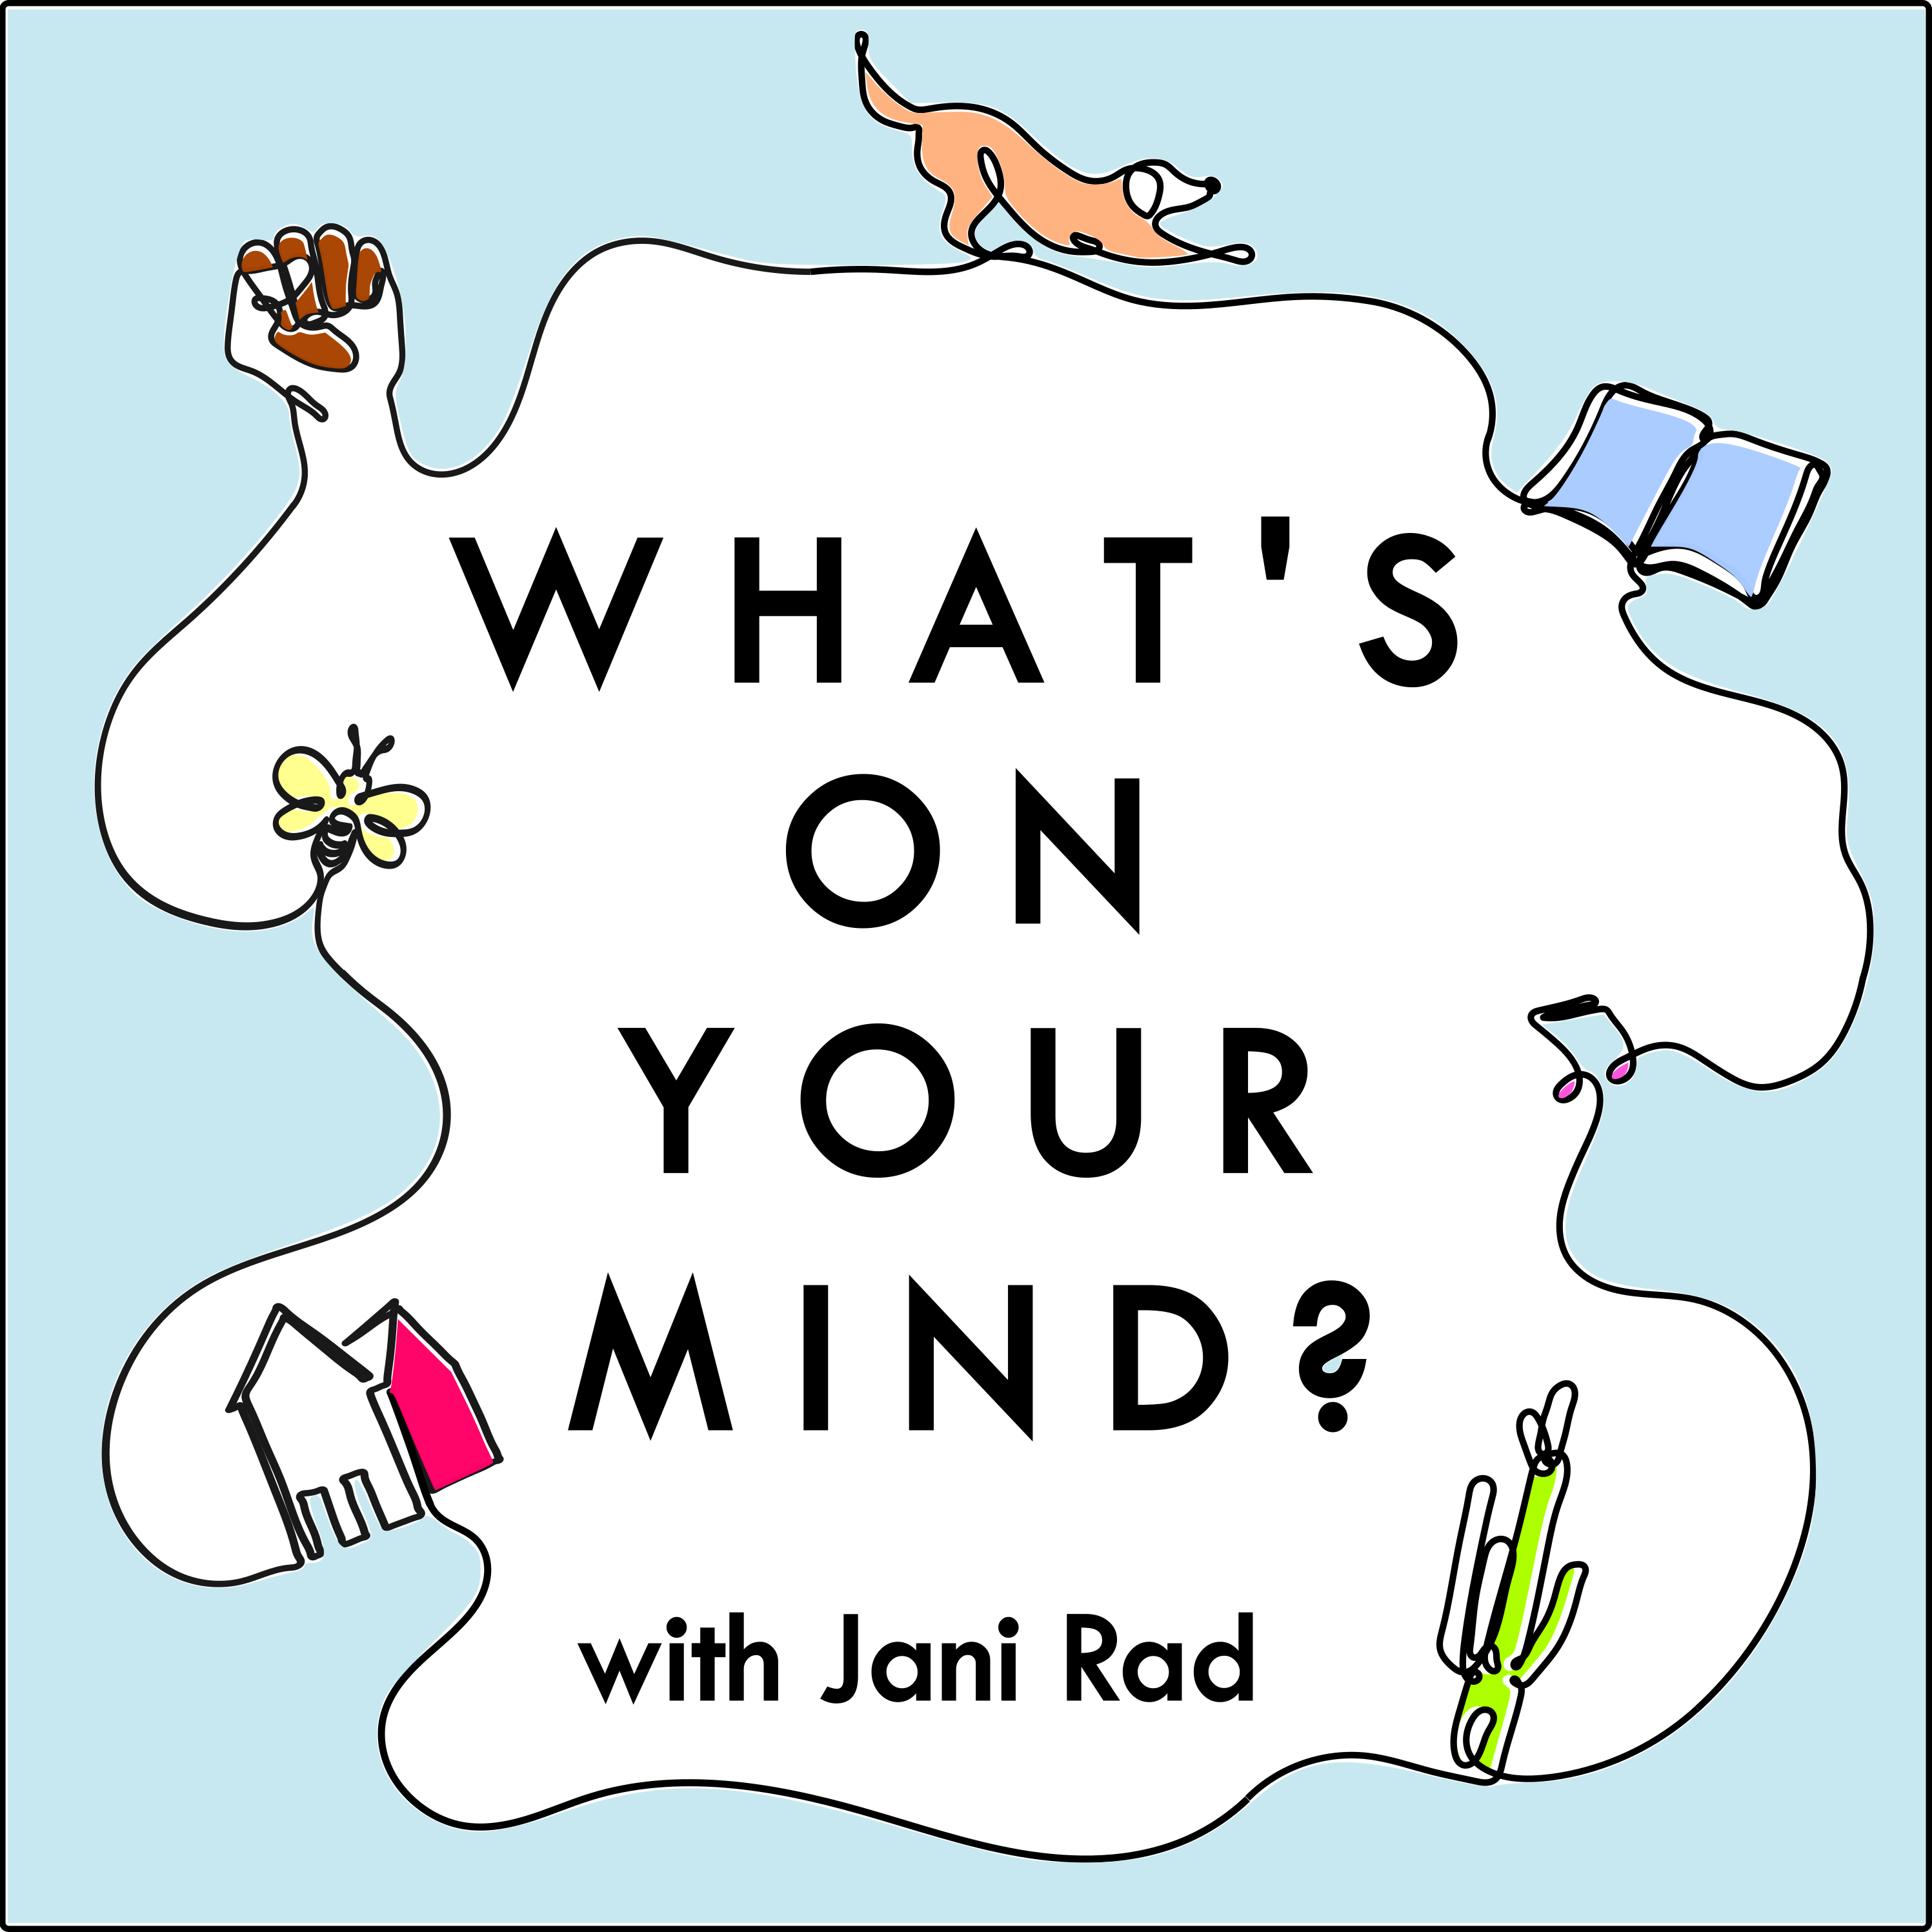 Jani's podcast logo, What's on your mind? with Jani Rad